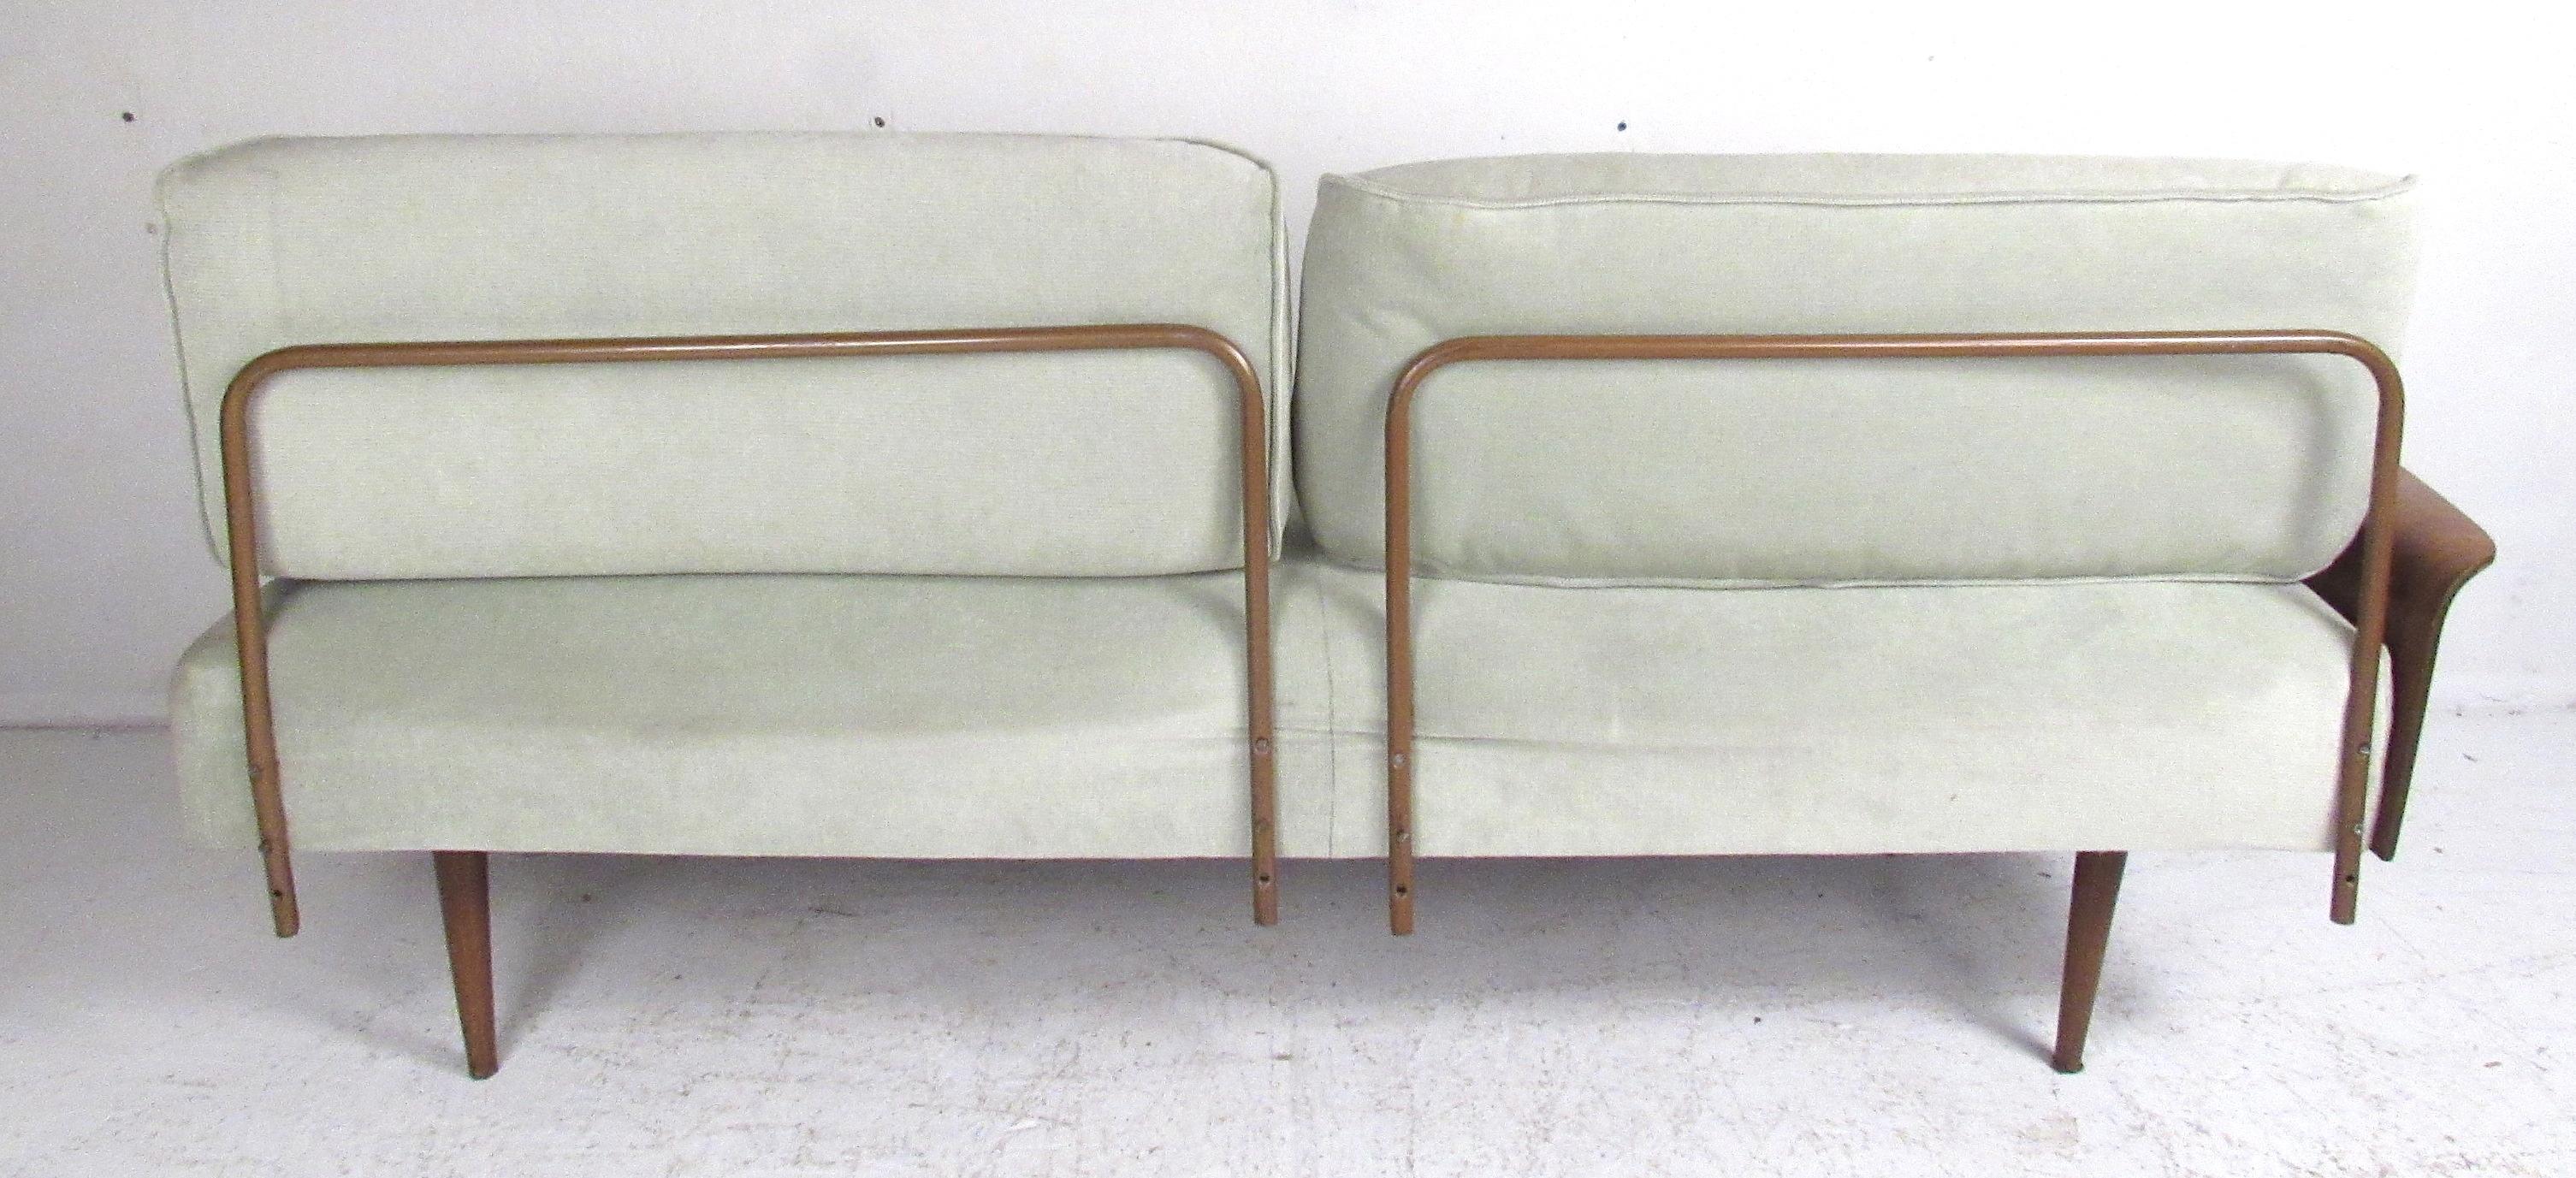 American Vintage Pair of Fan Arm Daybeds in the Style of Frank & Son